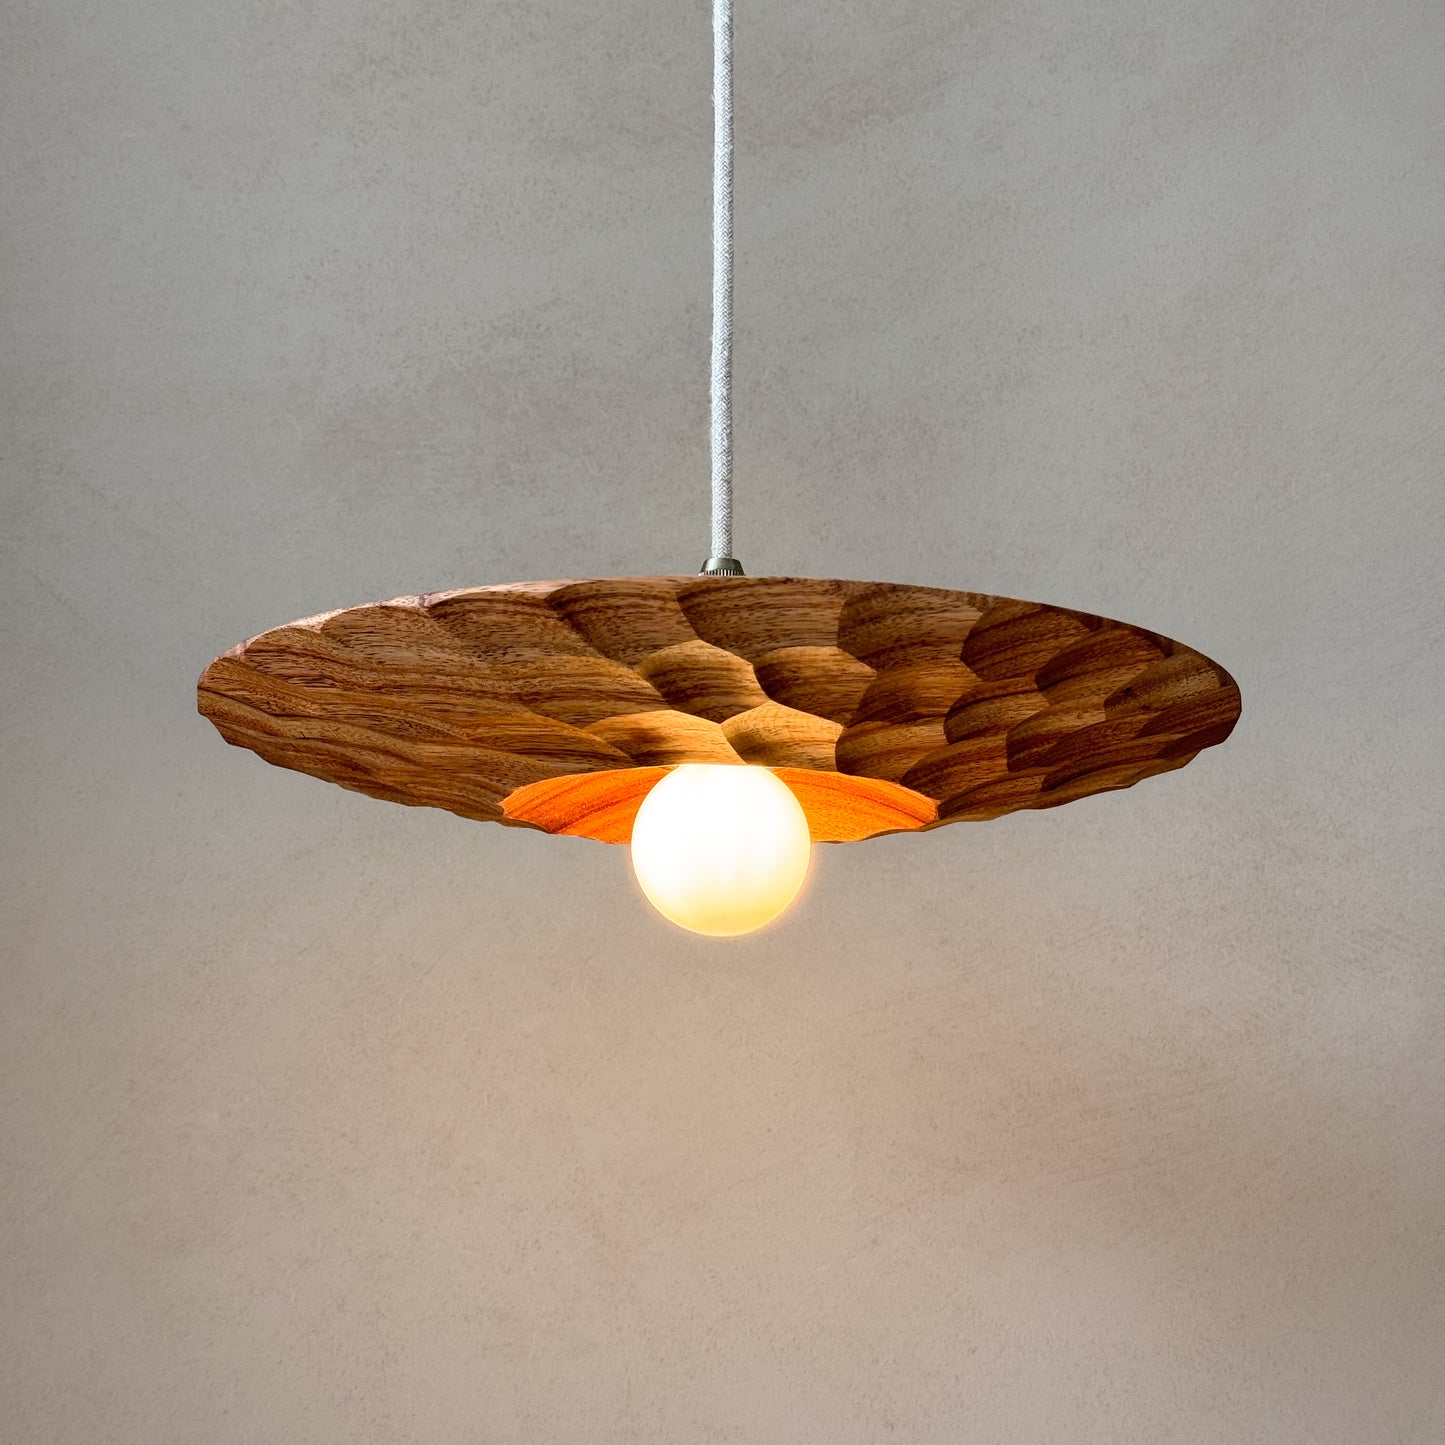 "There is no light without shadow" | Acacia Ceiling Lamp